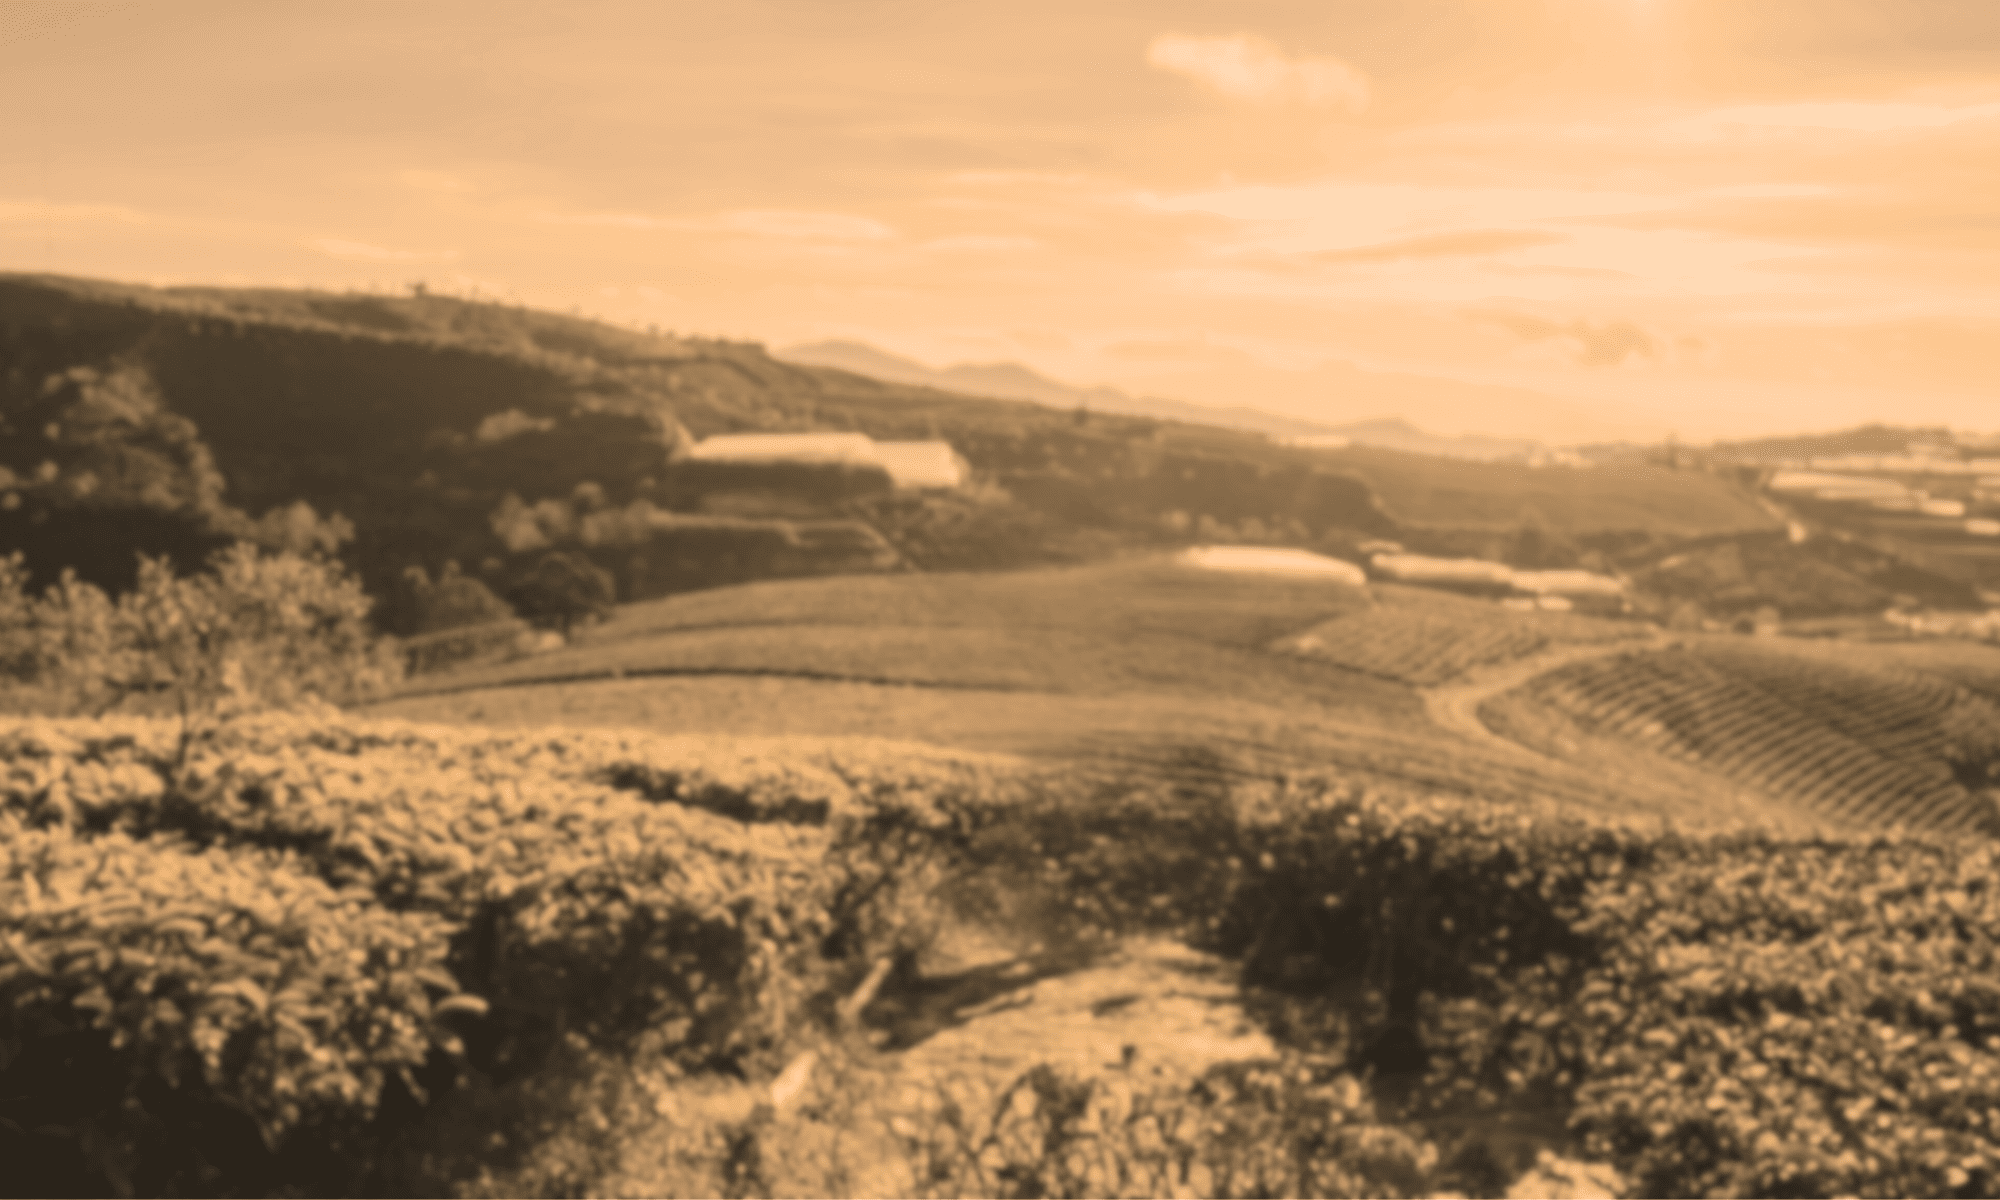 A view of a tea plantation in a sepia toned photo.